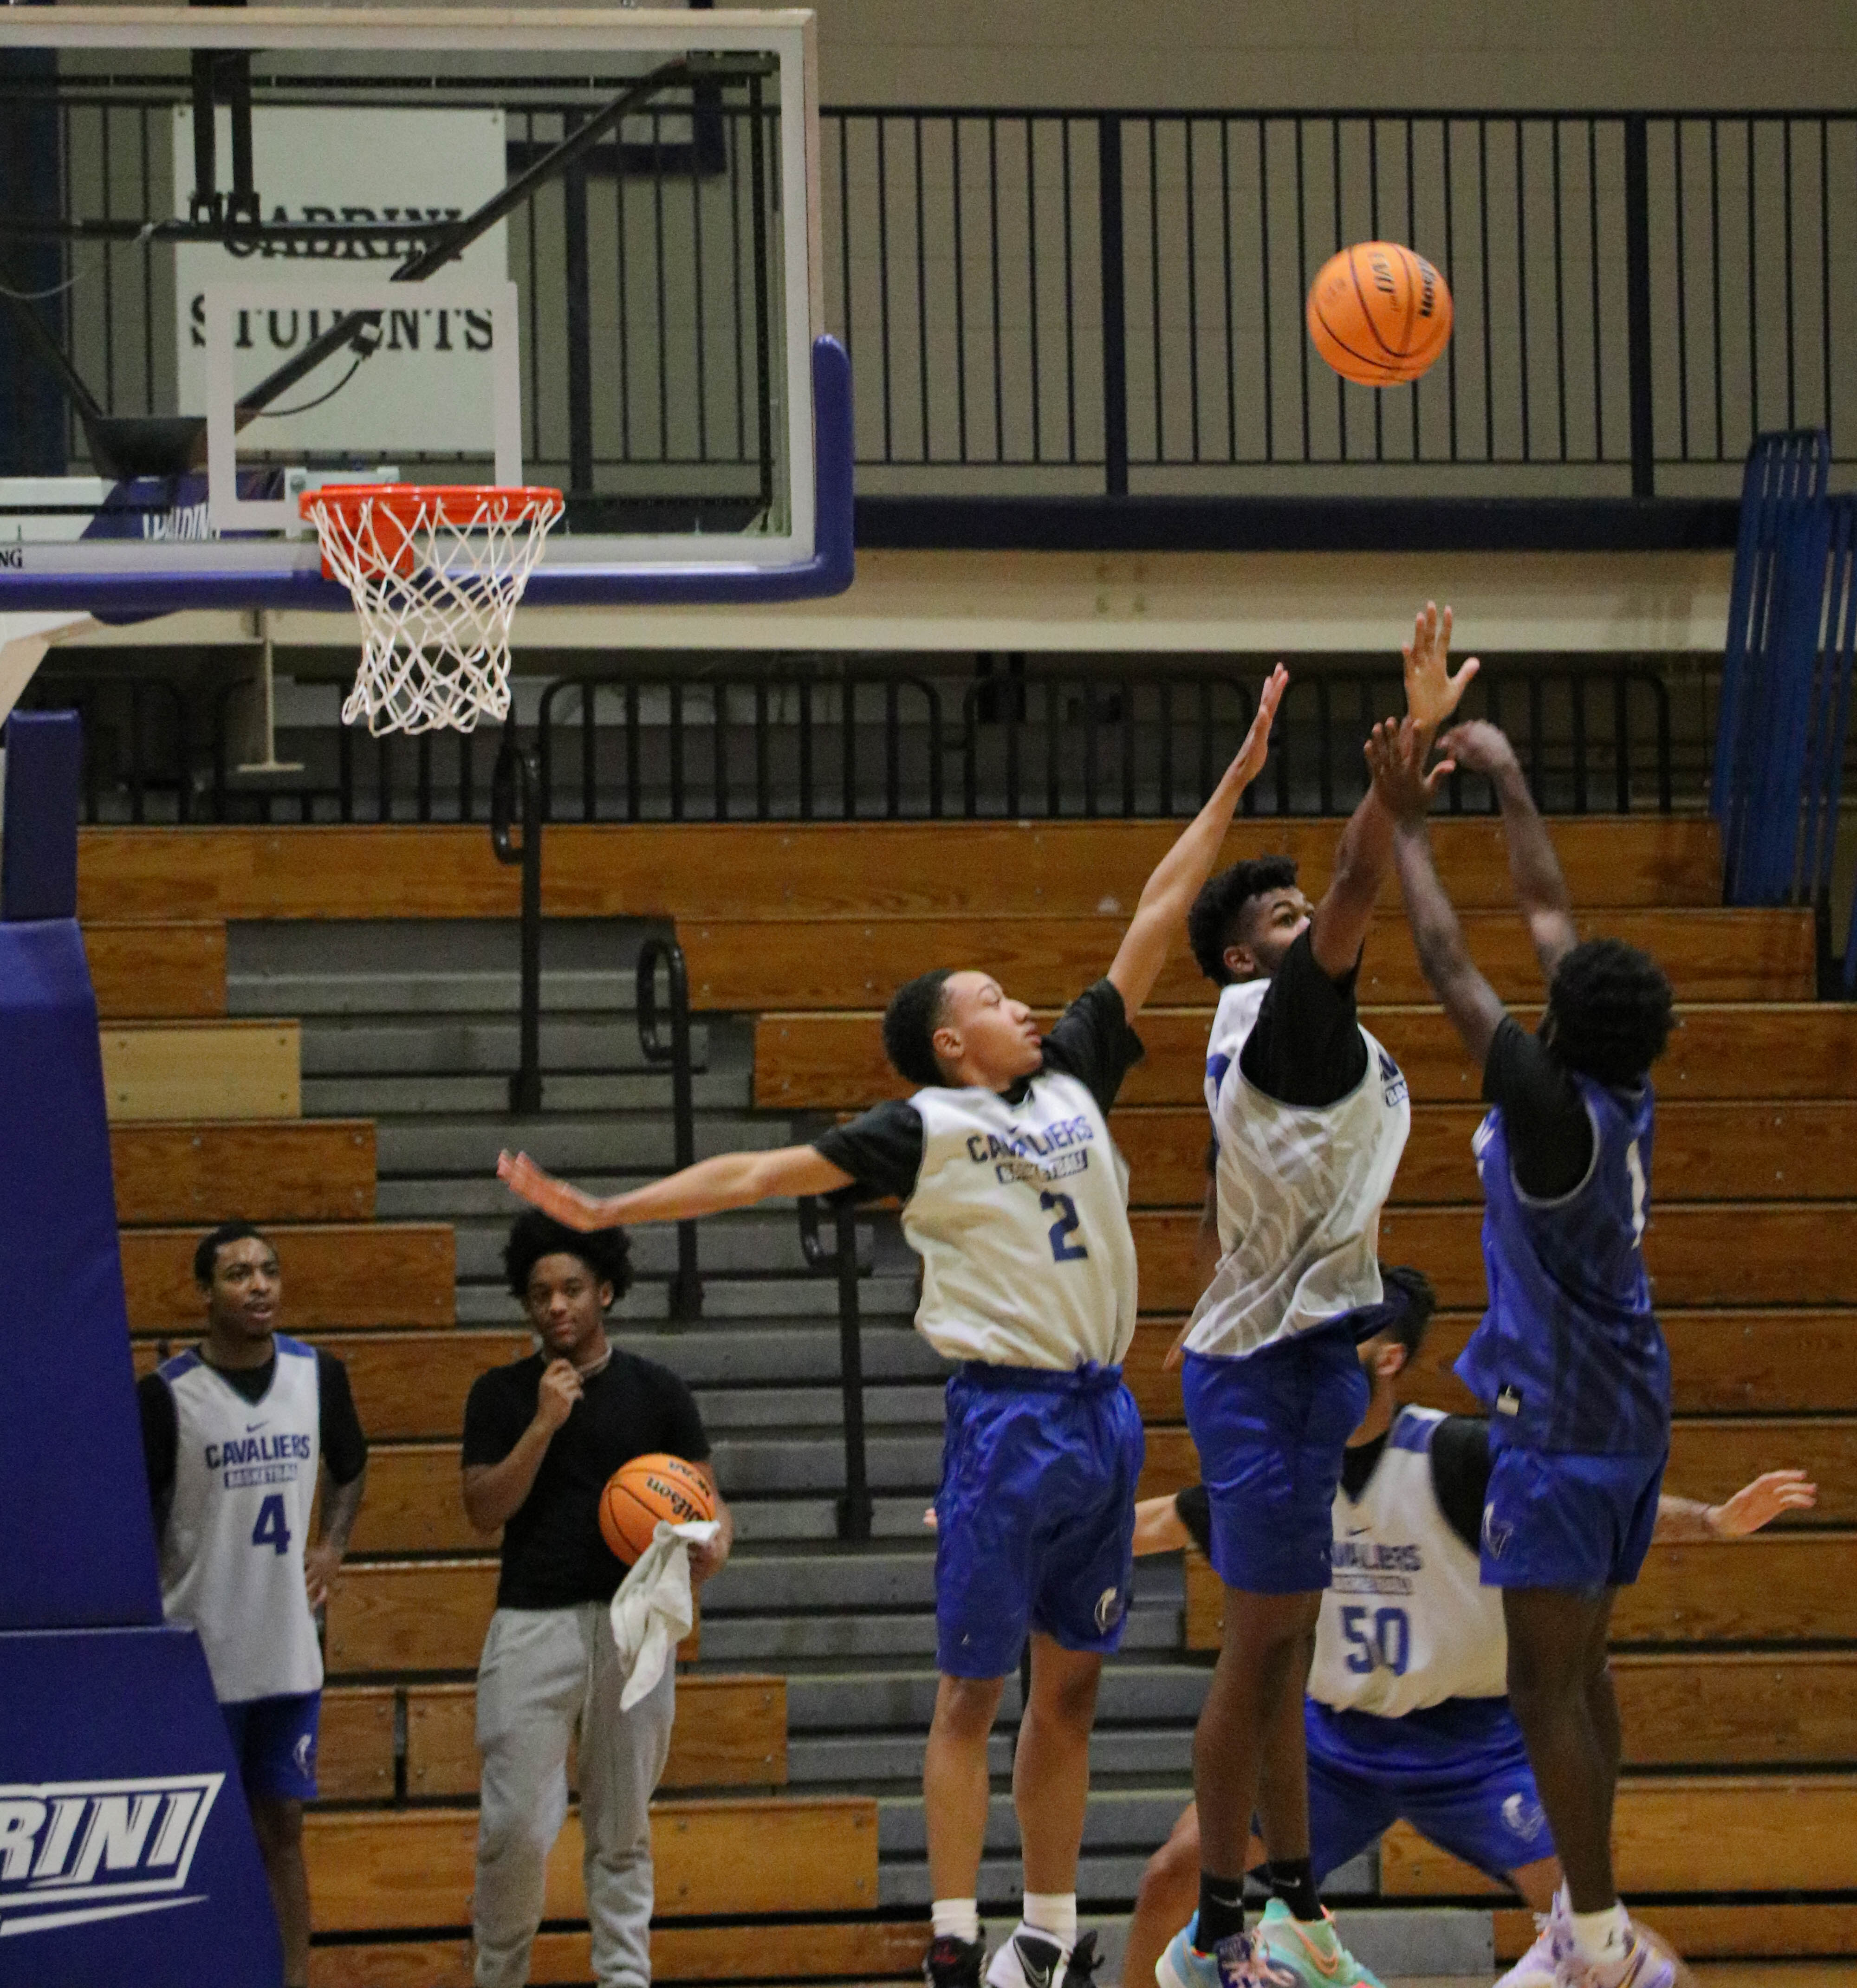 The Cabrini men’s basketball team practices in the Dixon Center gym. Photo by Max Silverman.